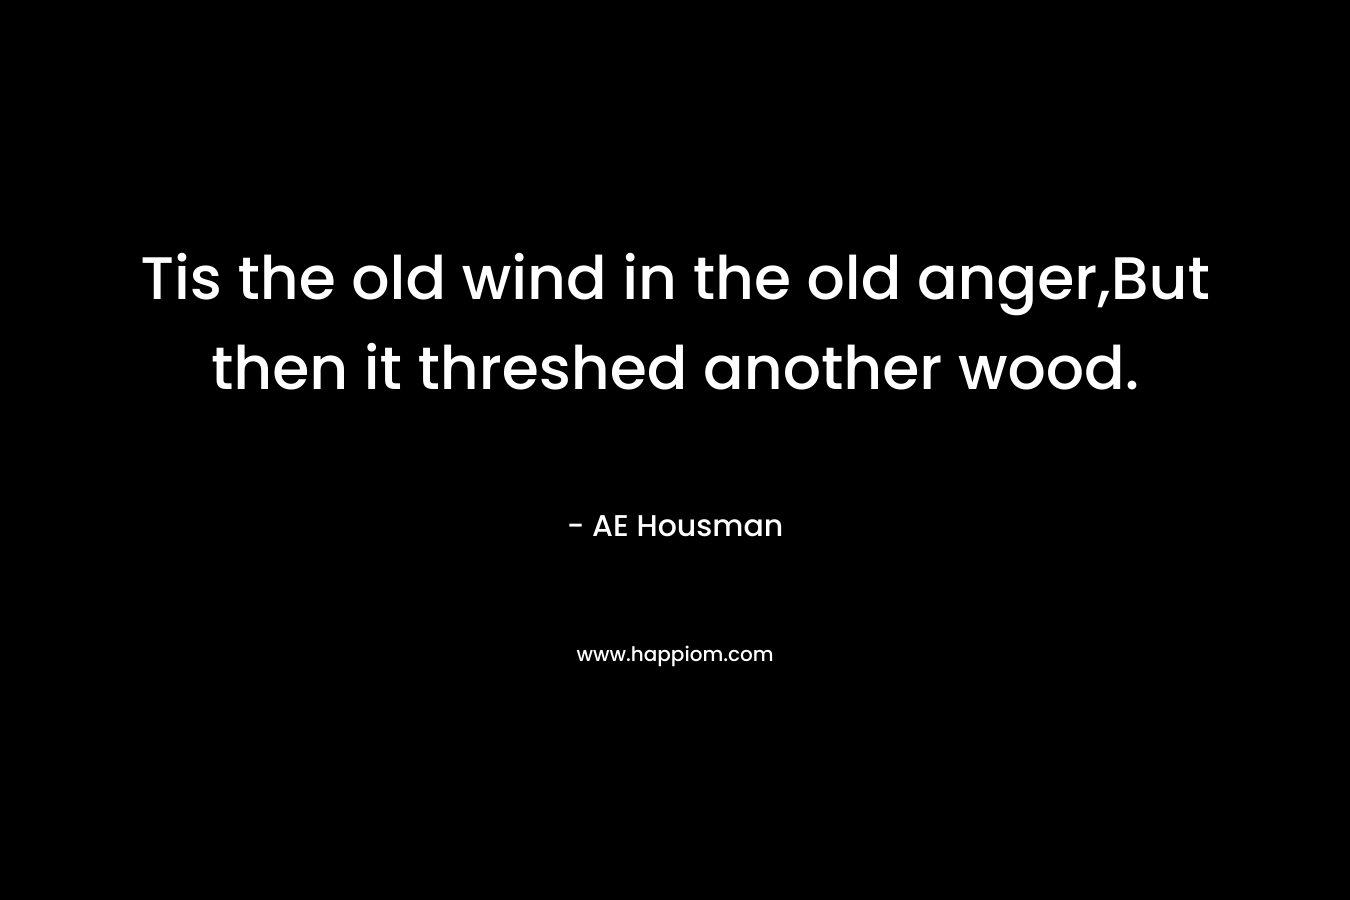 Tis the old wind in the old anger,But then it threshed another wood.